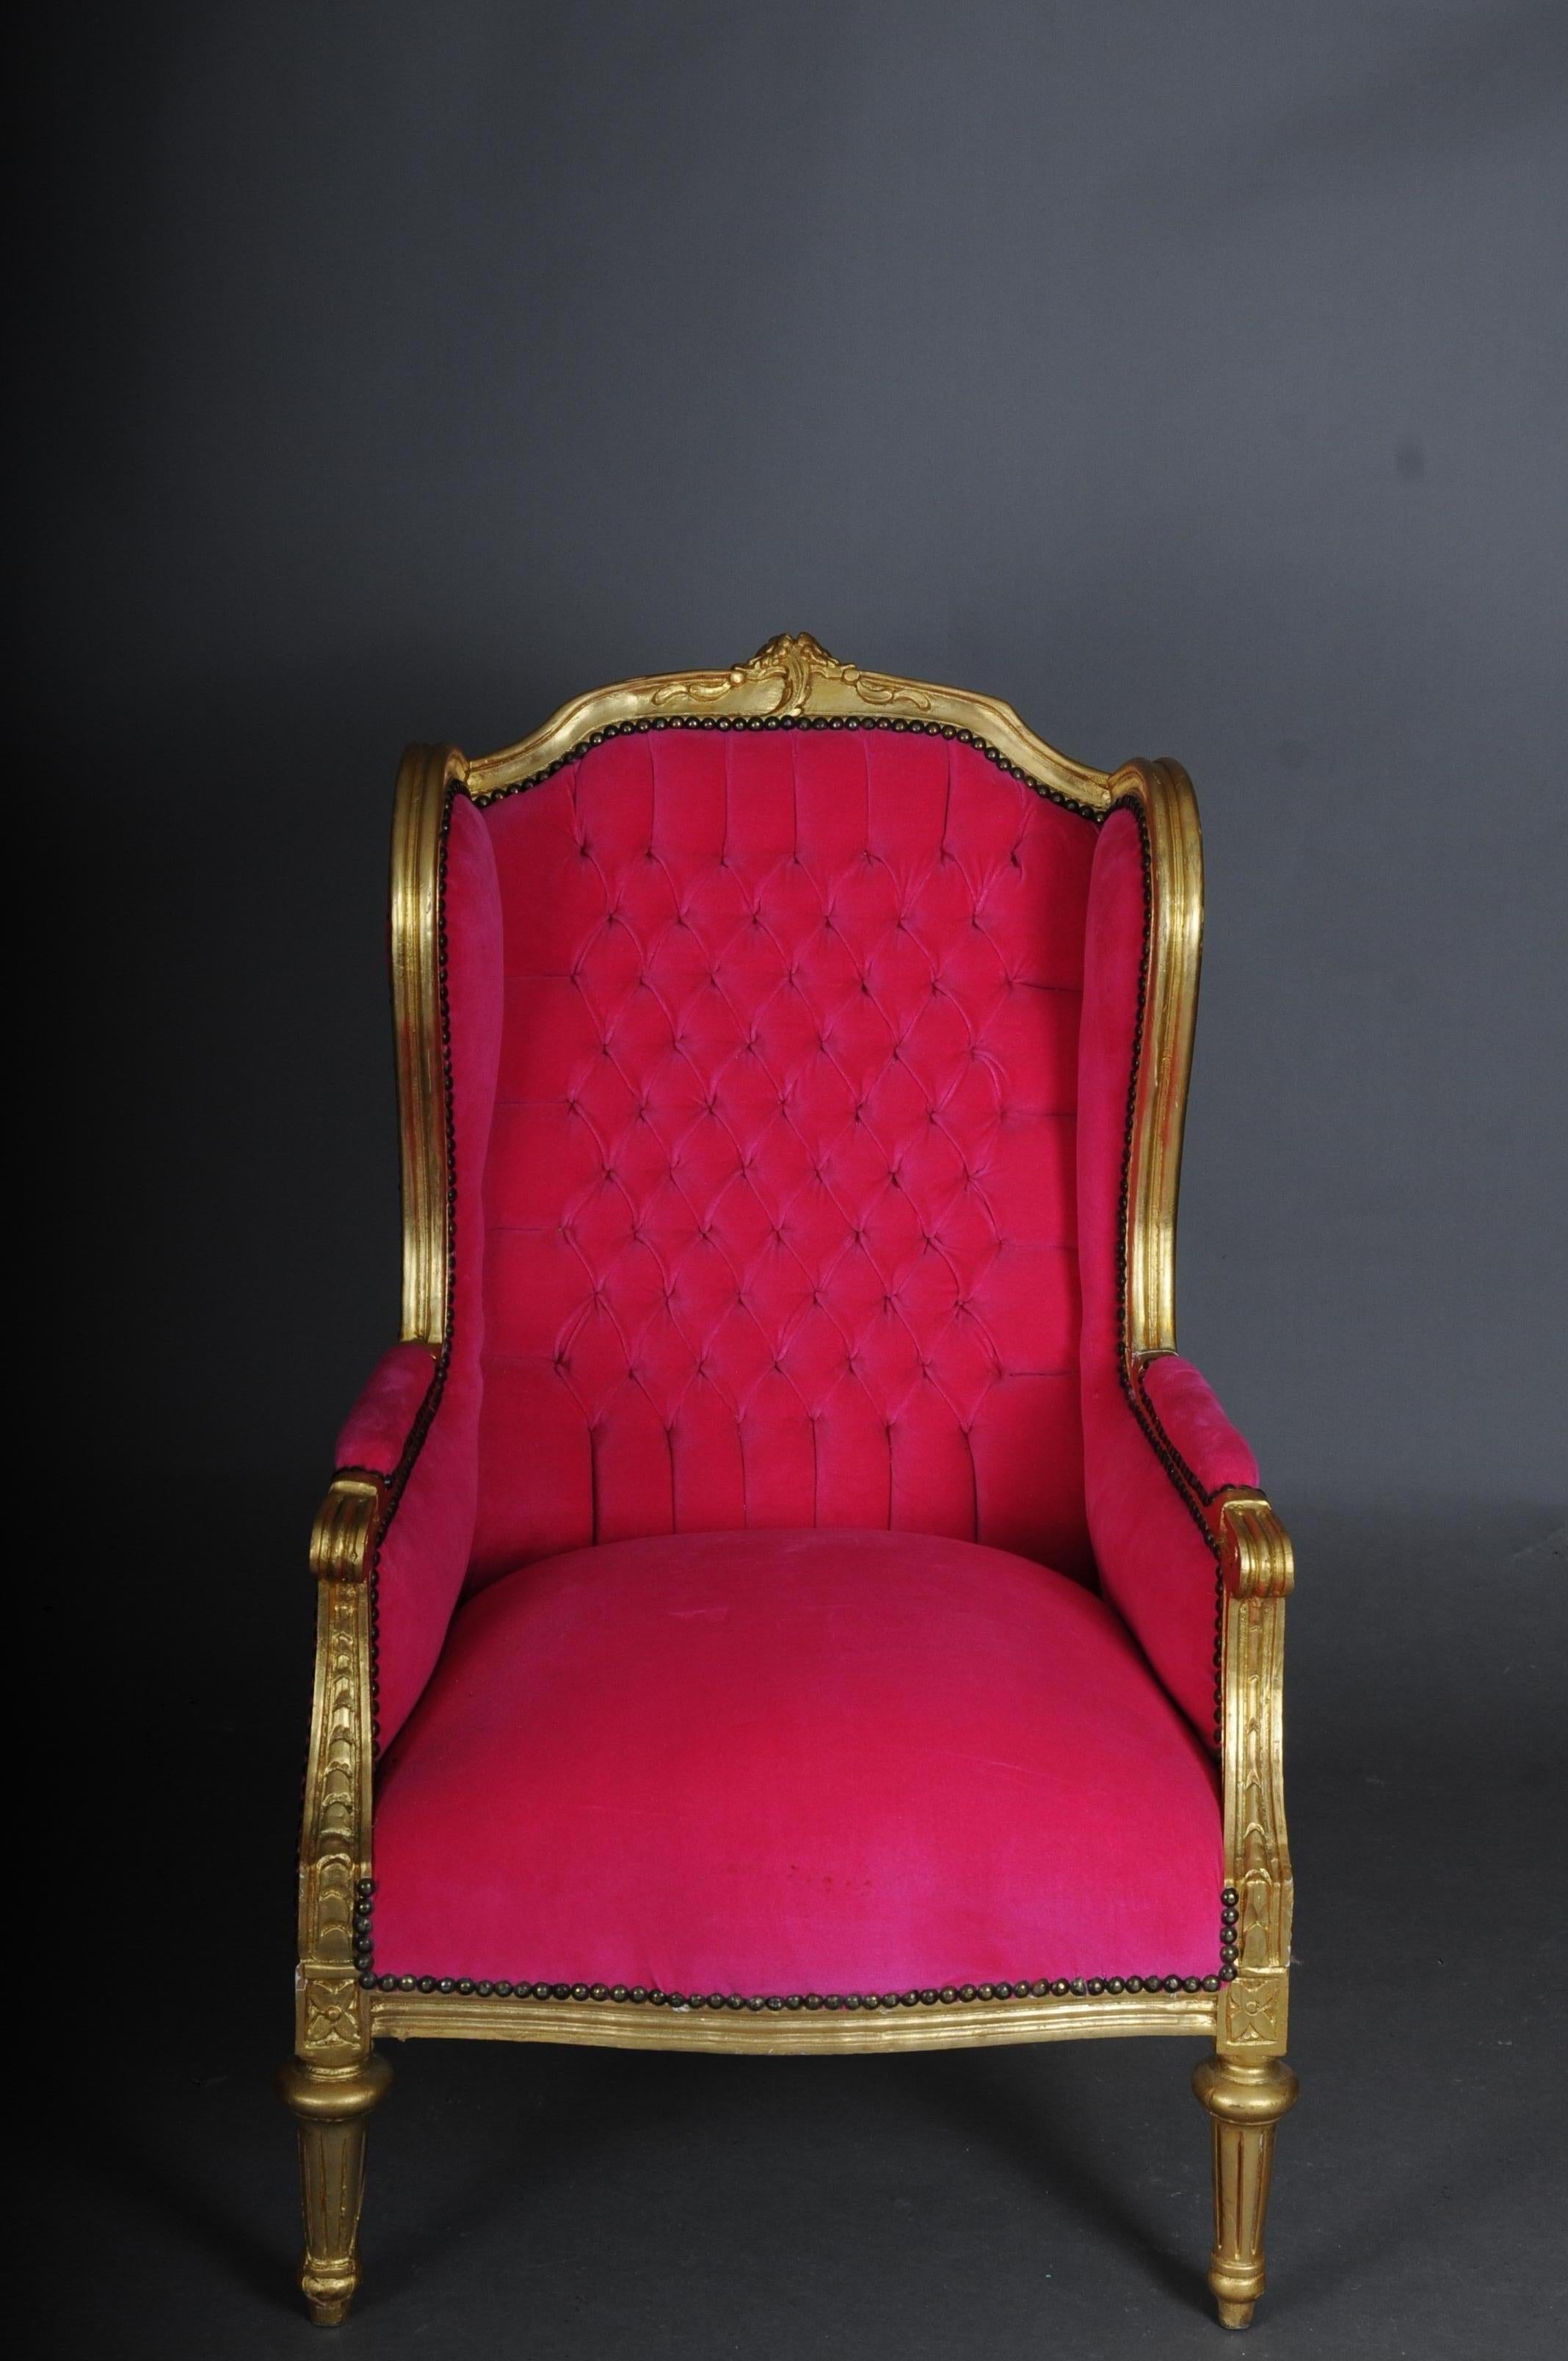 French wing chair Louis XVI, pink velvet fabric

Solid beechwood, carved, gold painted and gilded. Rectangular rising backrests framed with rocaille crowns. Carefully curved, carved frame. Frame on fluted legs. The seat and backrest are processed